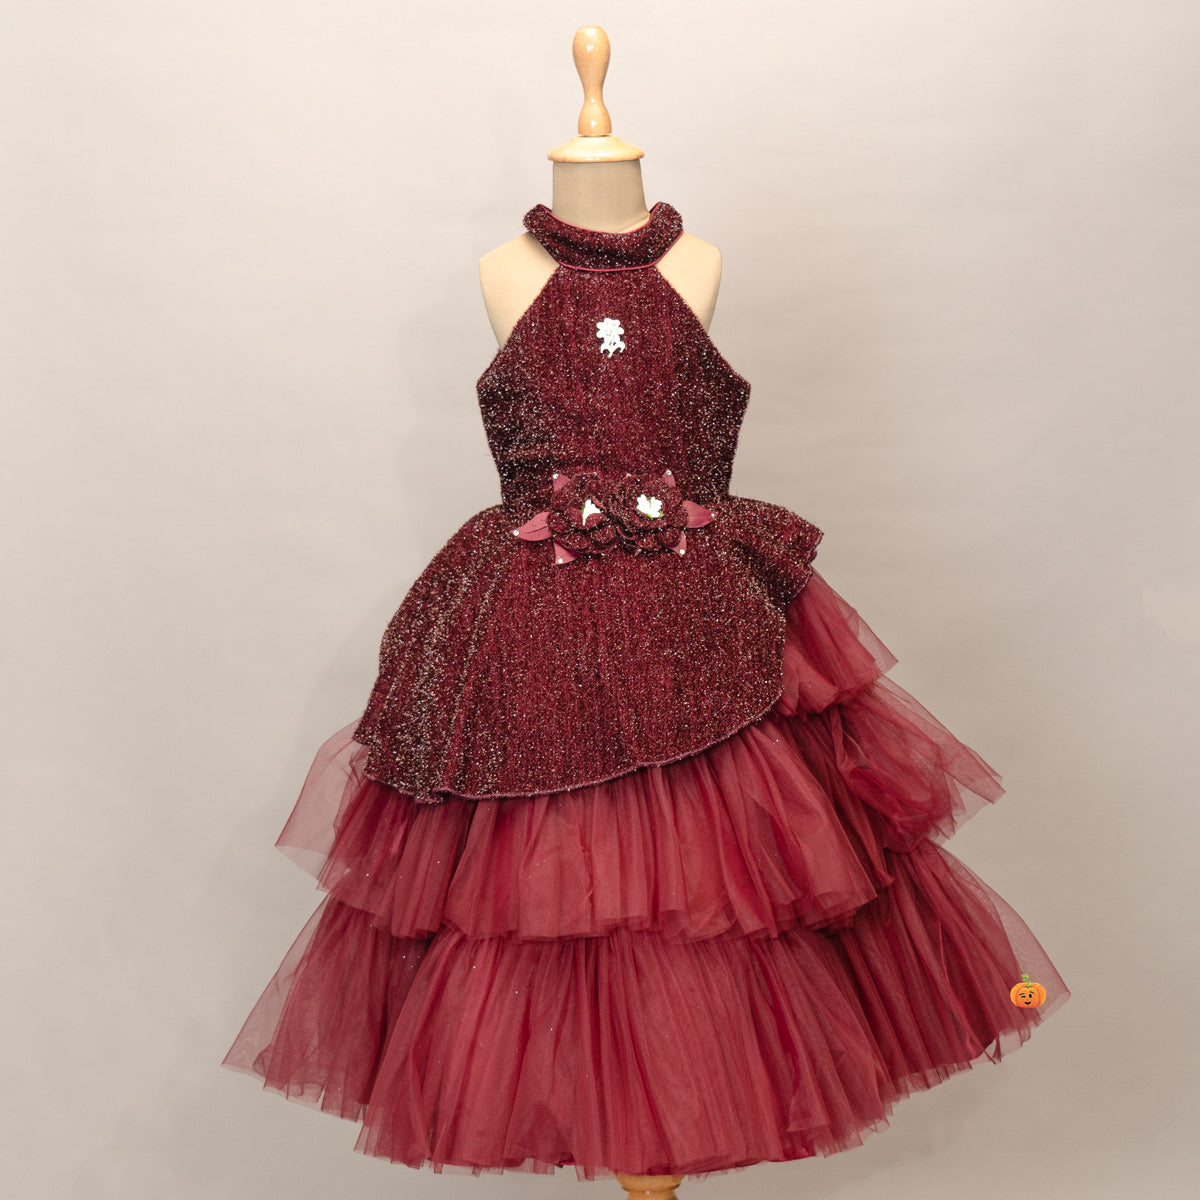 Buy Standard Quality China Wholesale Custom Elegant Dress Baby Girls  Birthday Fairy Frocks Designs Girl Baby Dress 1year Kids Princess Gown $5.5  Direct from Factory at Guangzhou Liwan District Star Qi Children's